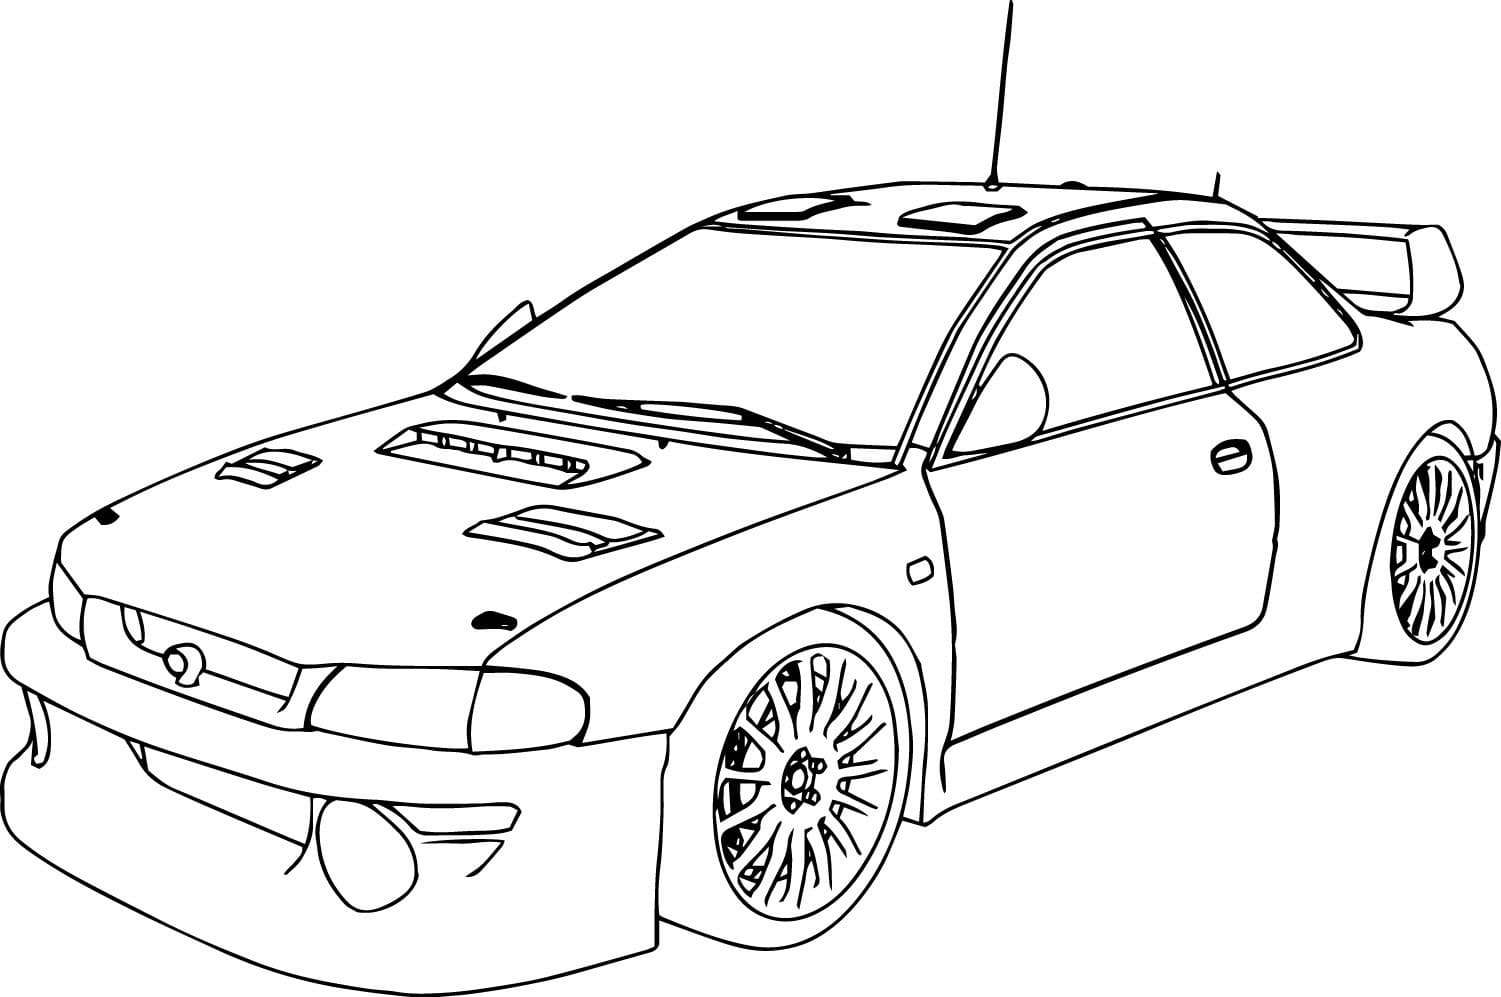 Coloring page Race cars A car for boys